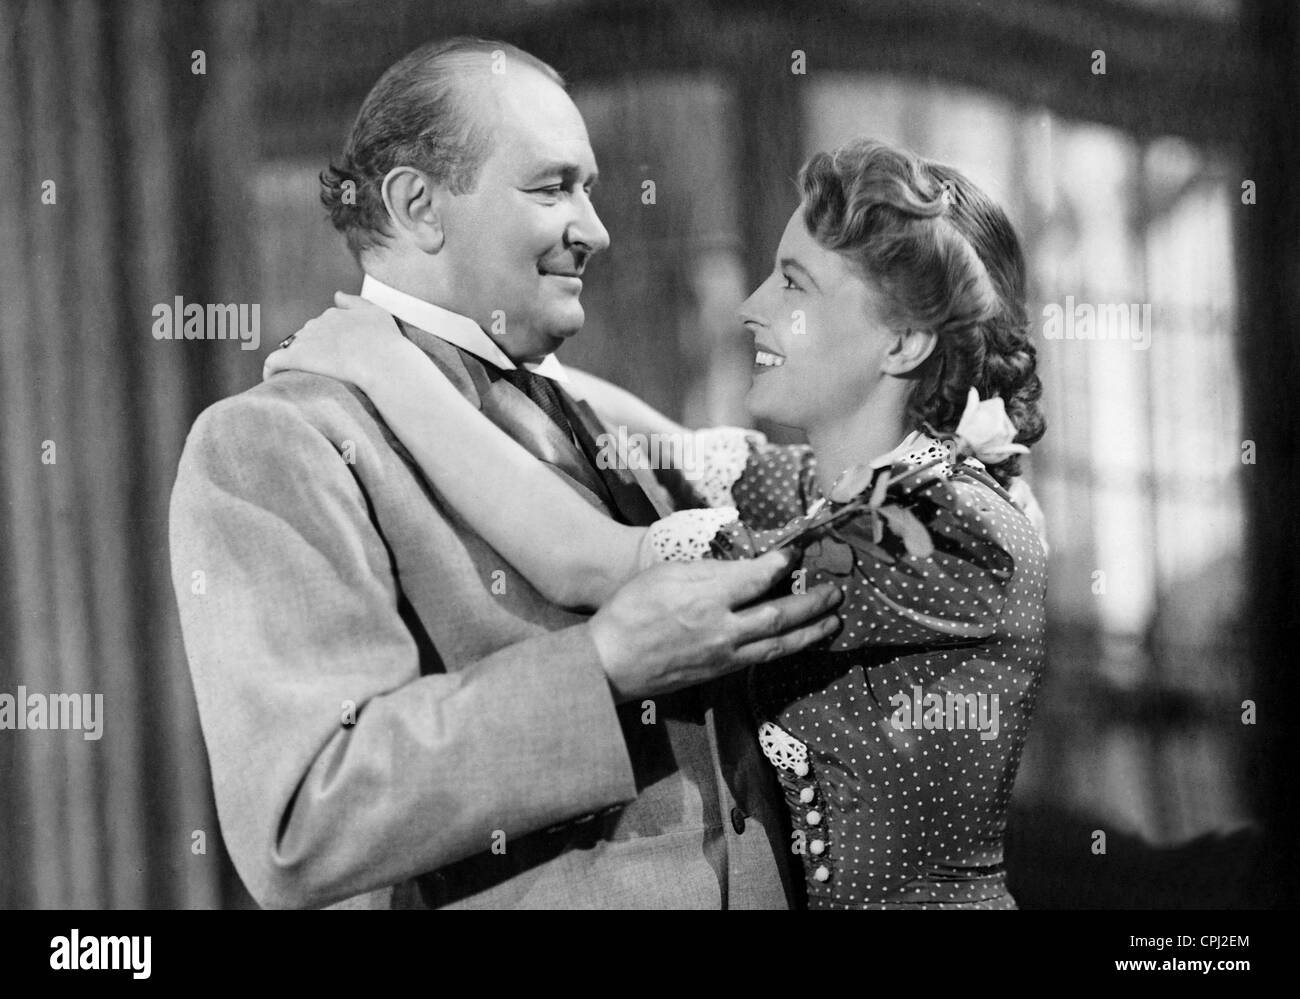 Eugen Kloepfer and Marianne Hoppe in 'Voice of the Heart', 1942 Stock Photo